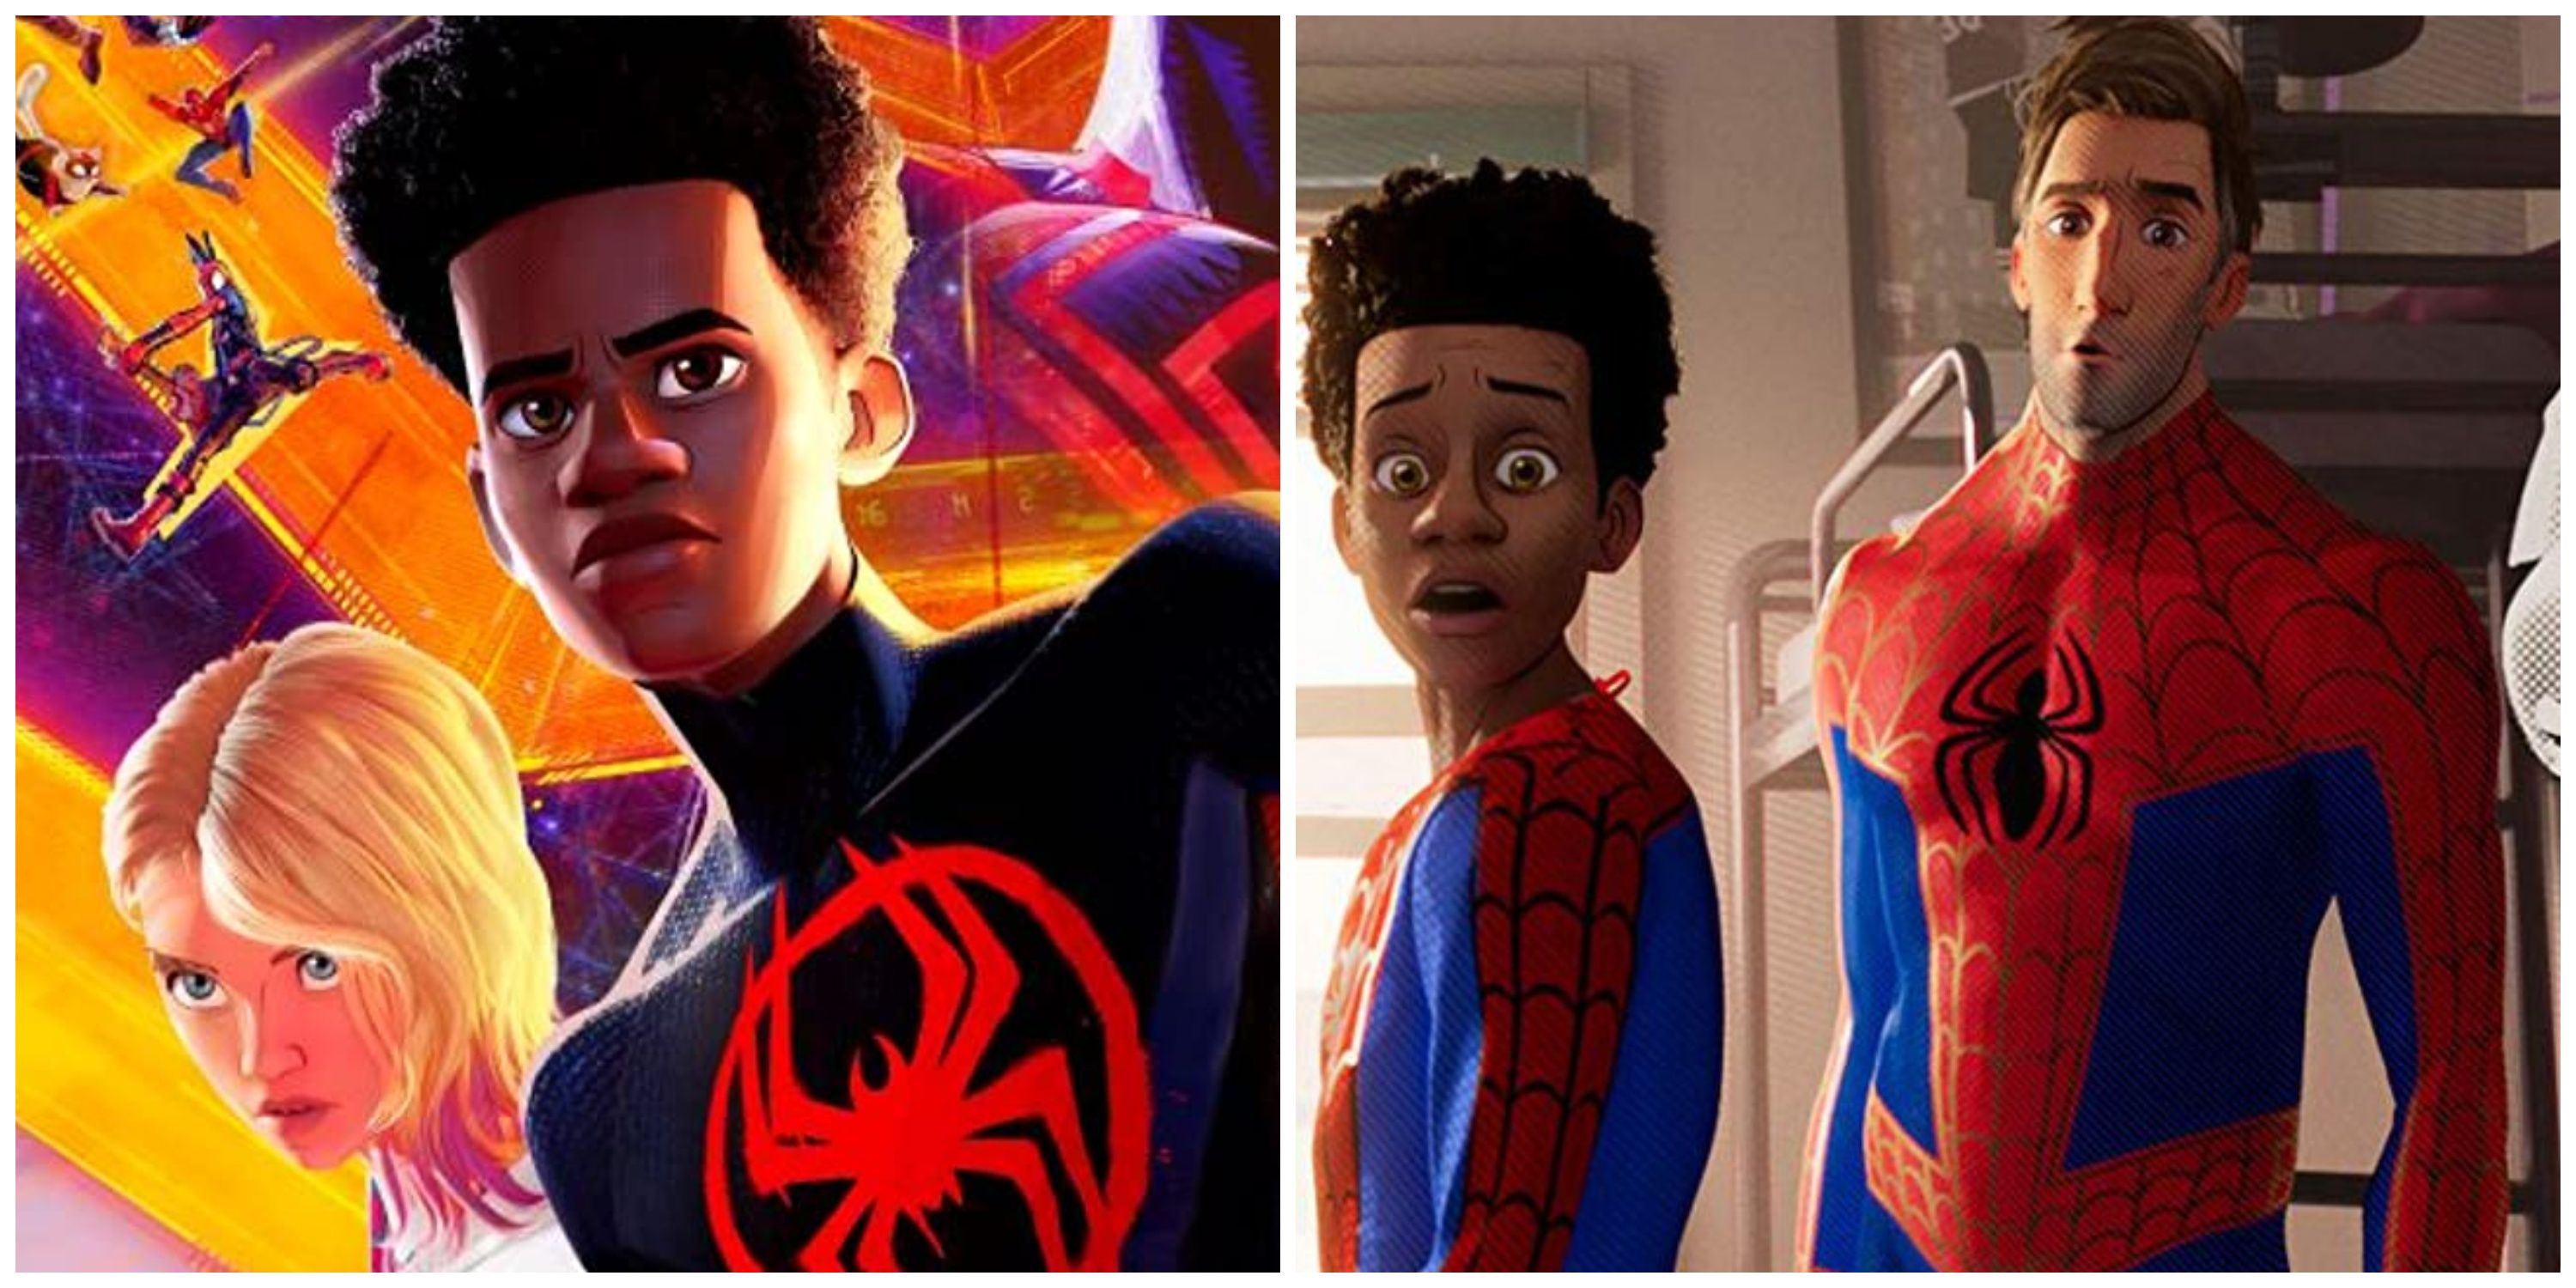 miles morales spider-man and spider-gwen from across the spider-verse against miles morales spider-man and peter b. parker spider-man from into the spider-verse